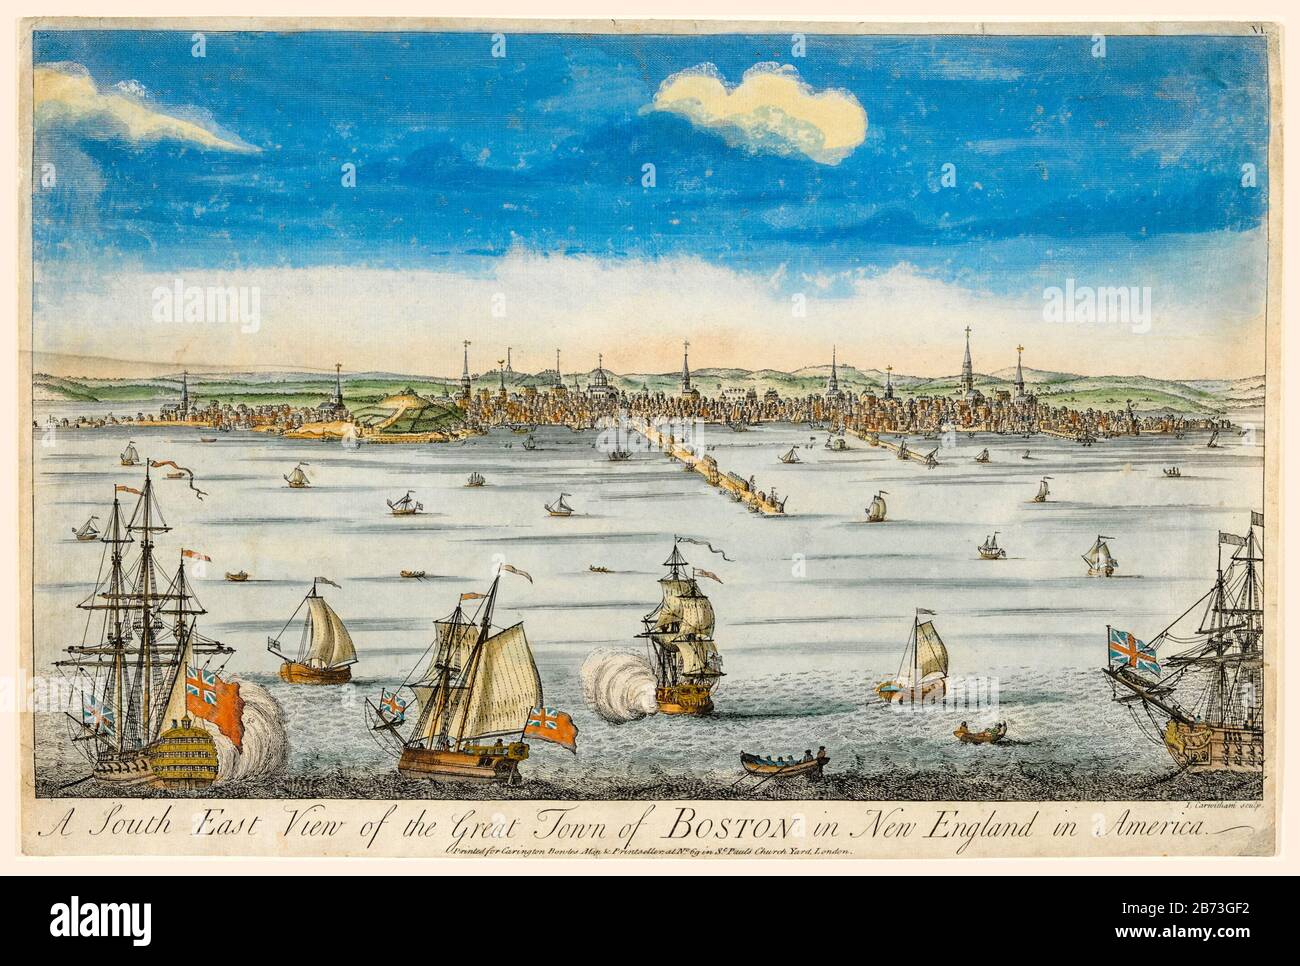 South East View of Boston, New England, America, from the ocean, 18th Century illustration by John Carwitham after William Burgis, 1731-1736 Stock Photo